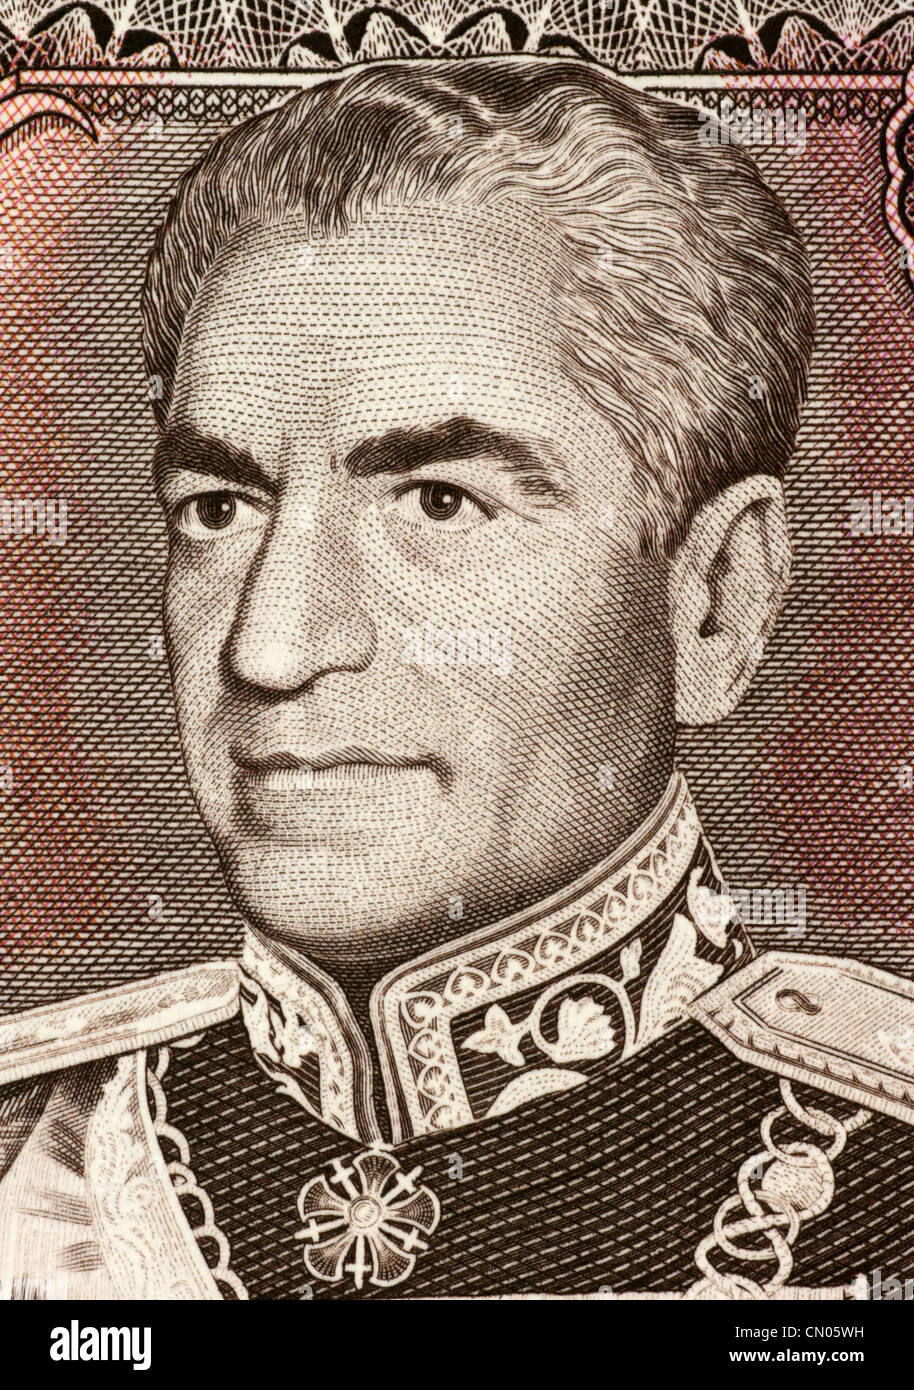 Reza Shah Pahlavi (1878-1844) on 20 Rials 1974 Banknote from Iran. Shah of the Imperial State of Iran during 1925-1841. Stock Photo